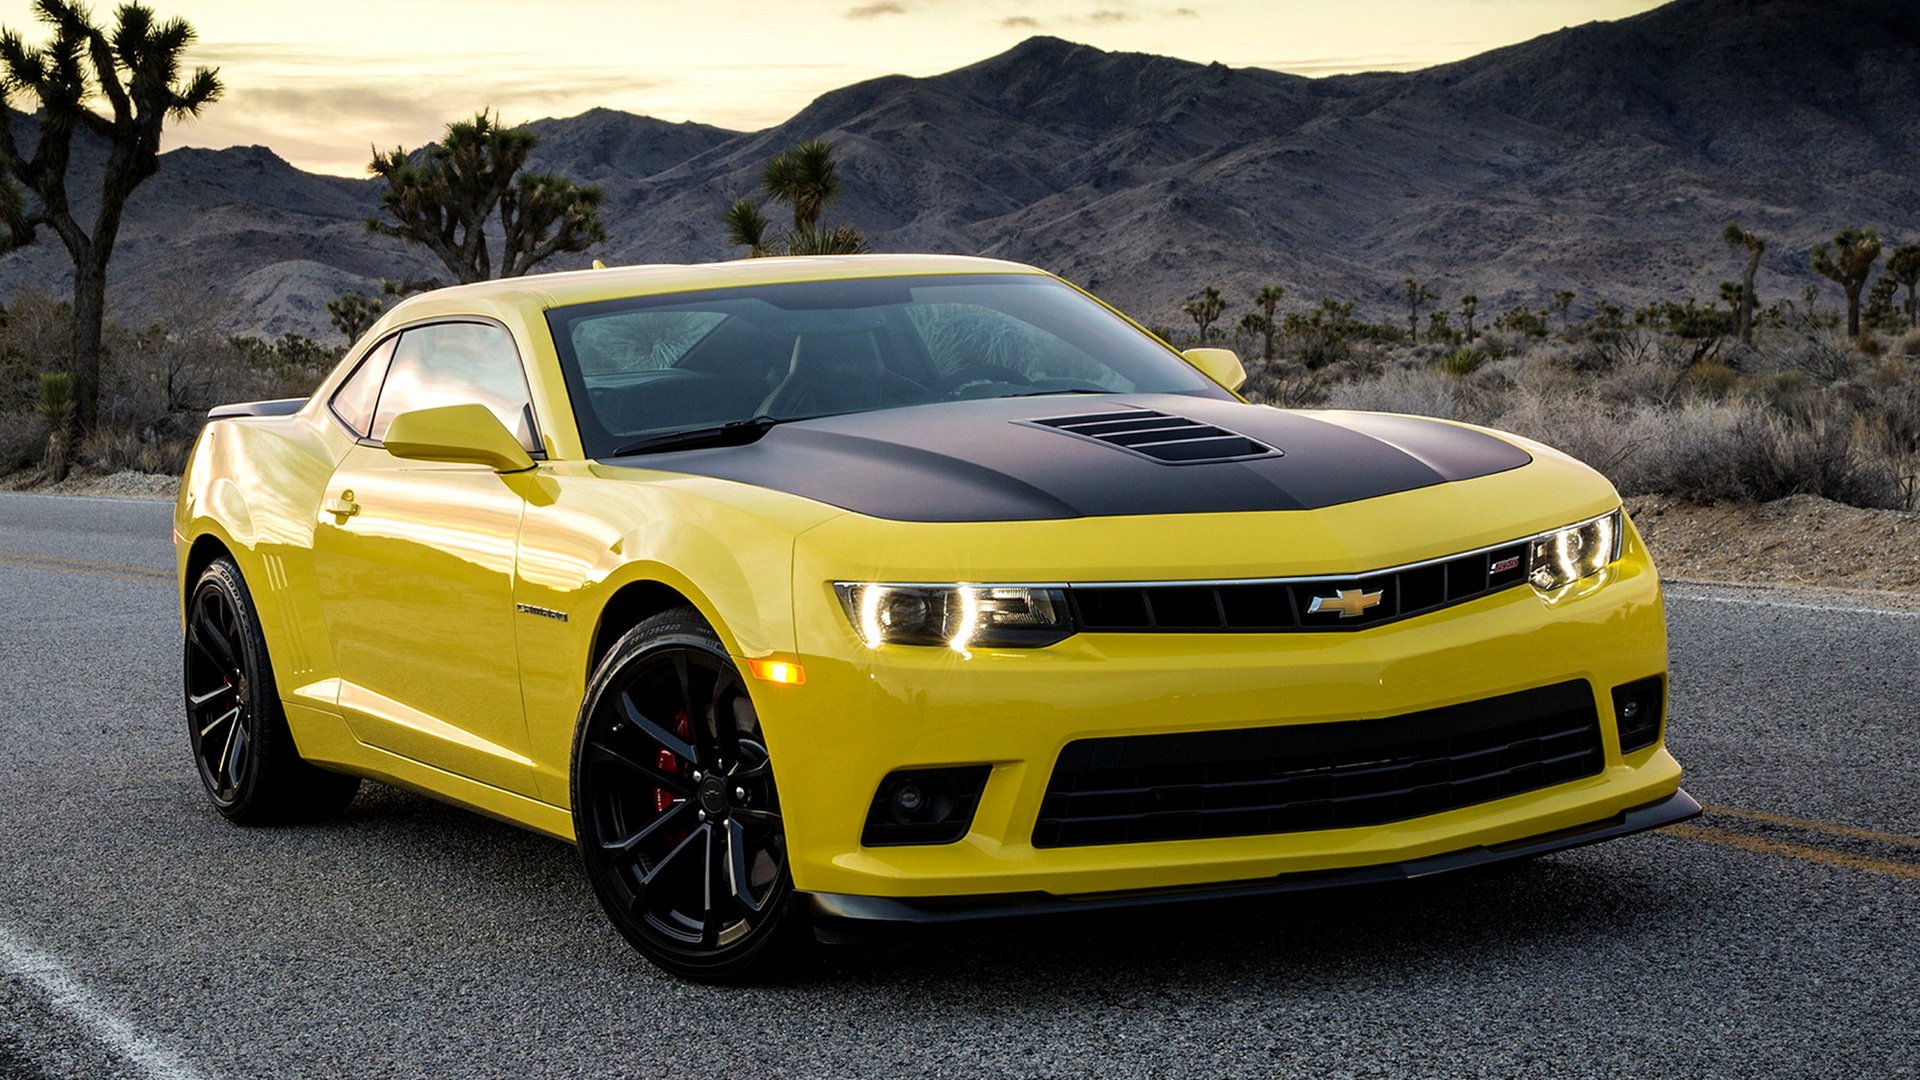 Chevrolet Camaro SS 1LE 2014 Wallpapers and HD Images